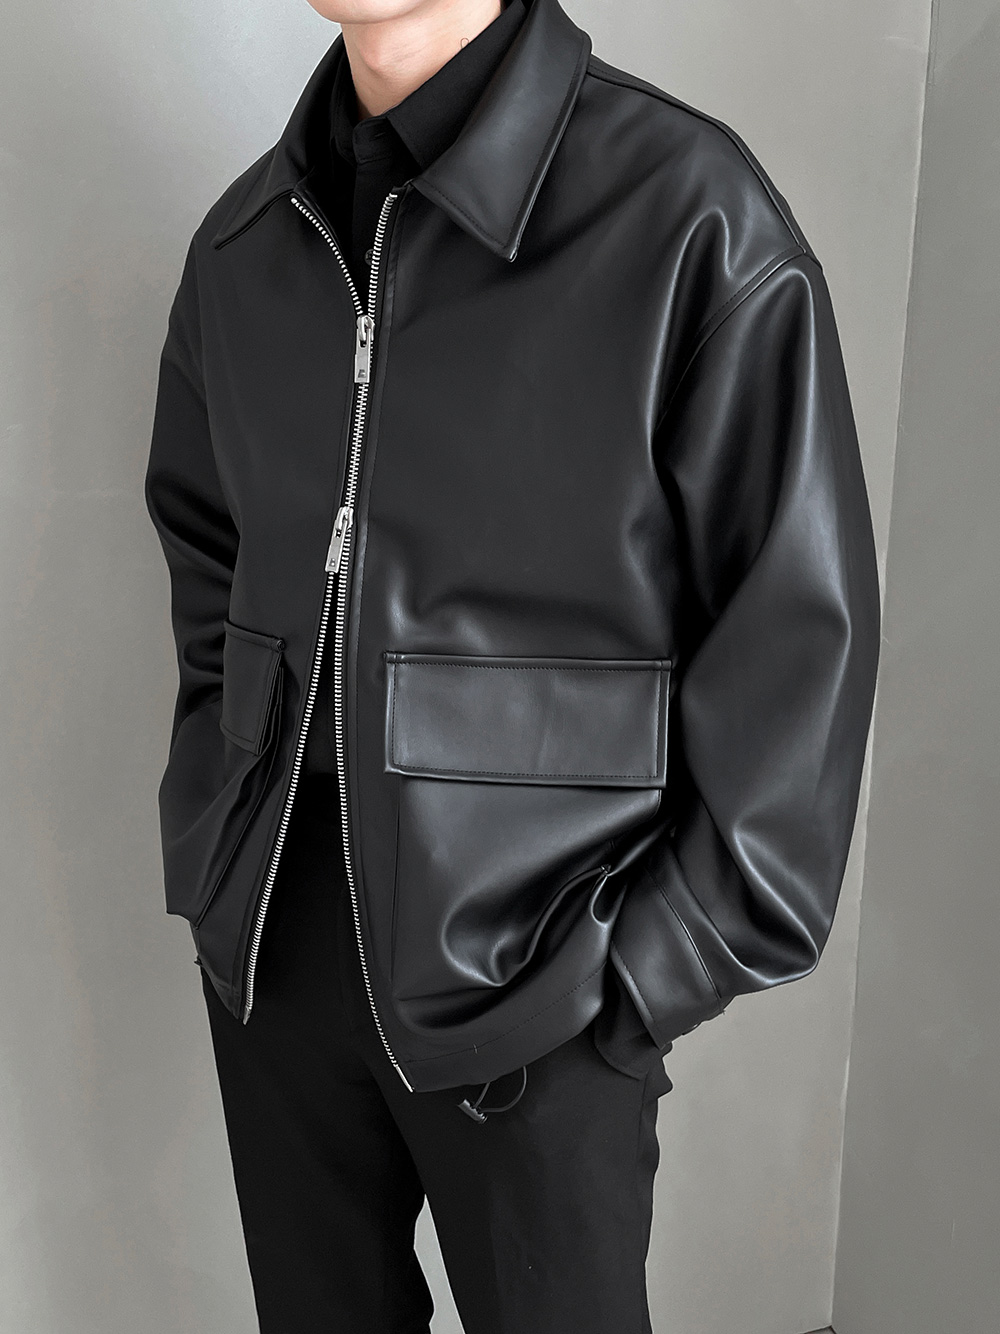 Asclo Two Way Zipper Leather Jumper